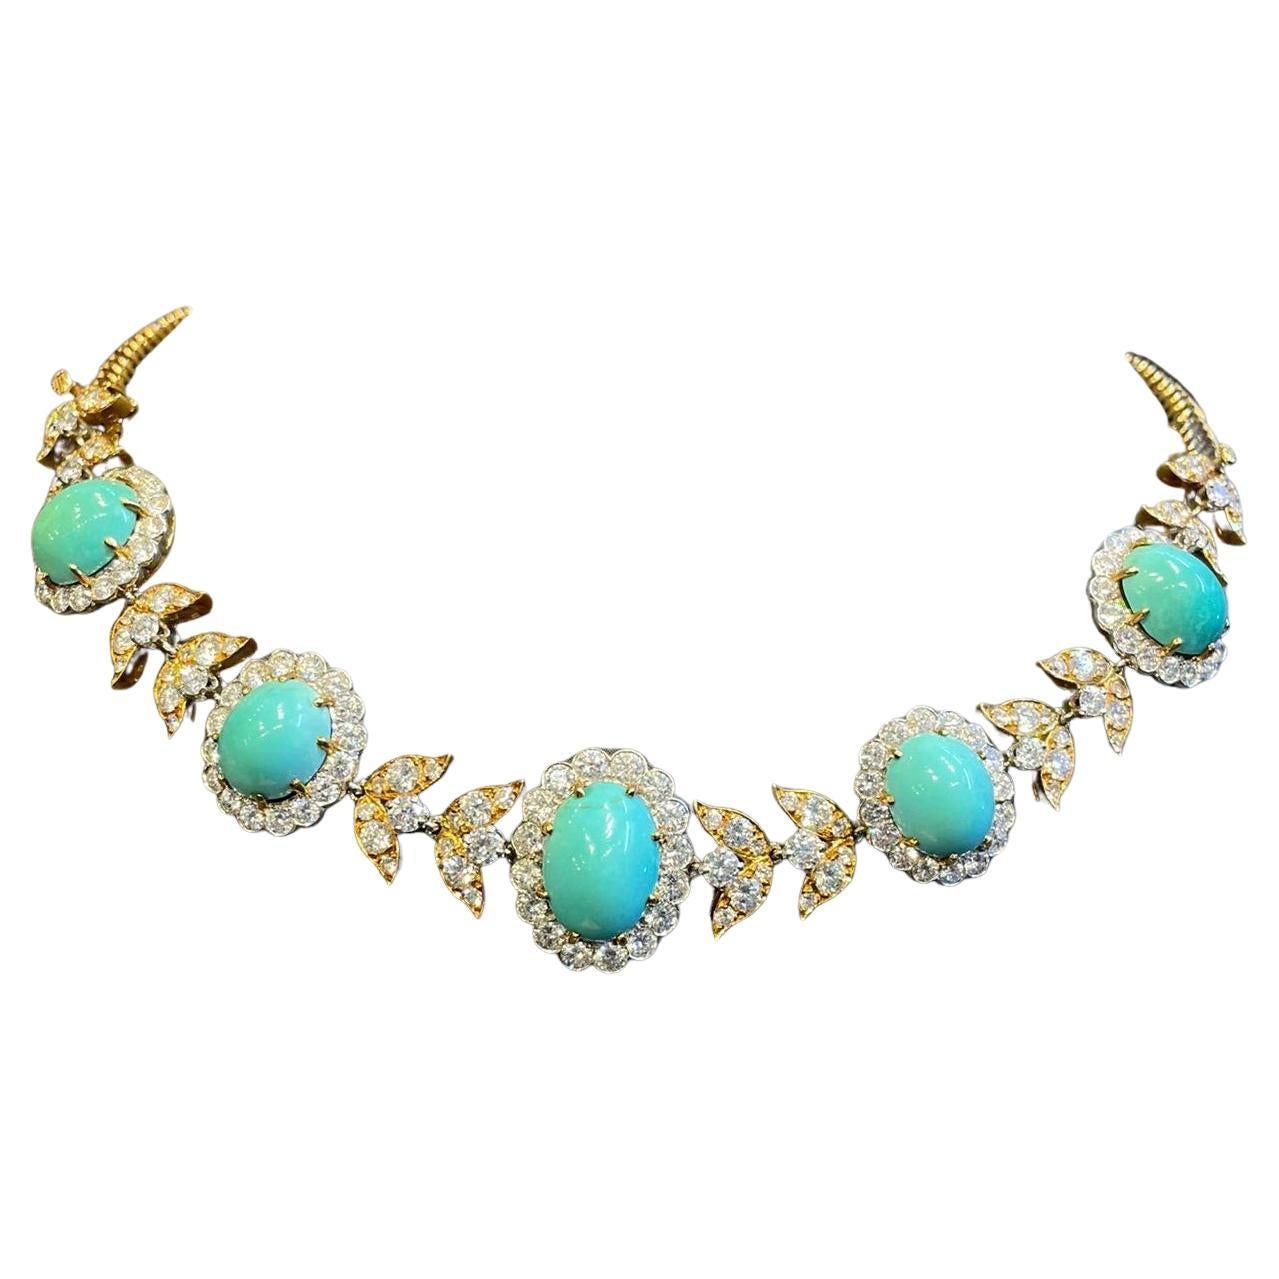 Van Cleef & Arpels Turquoise & Diamond Necklace

Circa 1955. 

Cabochon turquoise designed as a series of 5 oval graduated clusters with 2 leaf motif intersections, consisting of round cut diamonds & a chevron link chain. Converts into a